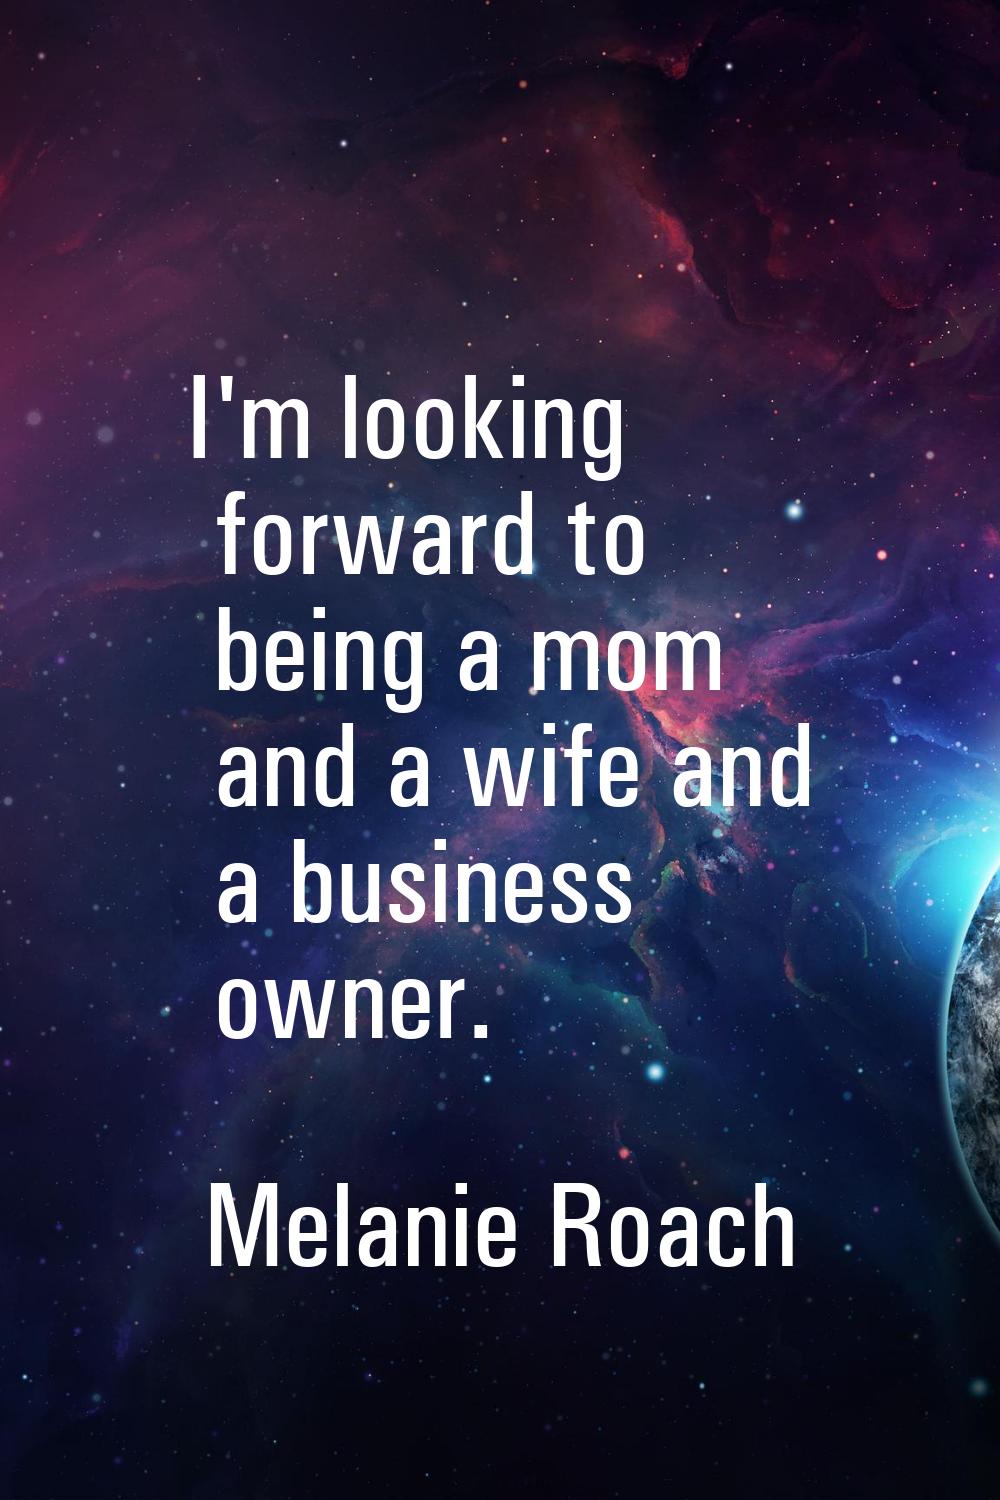 I'm looking forward to being a mom and a wife and a business owner.